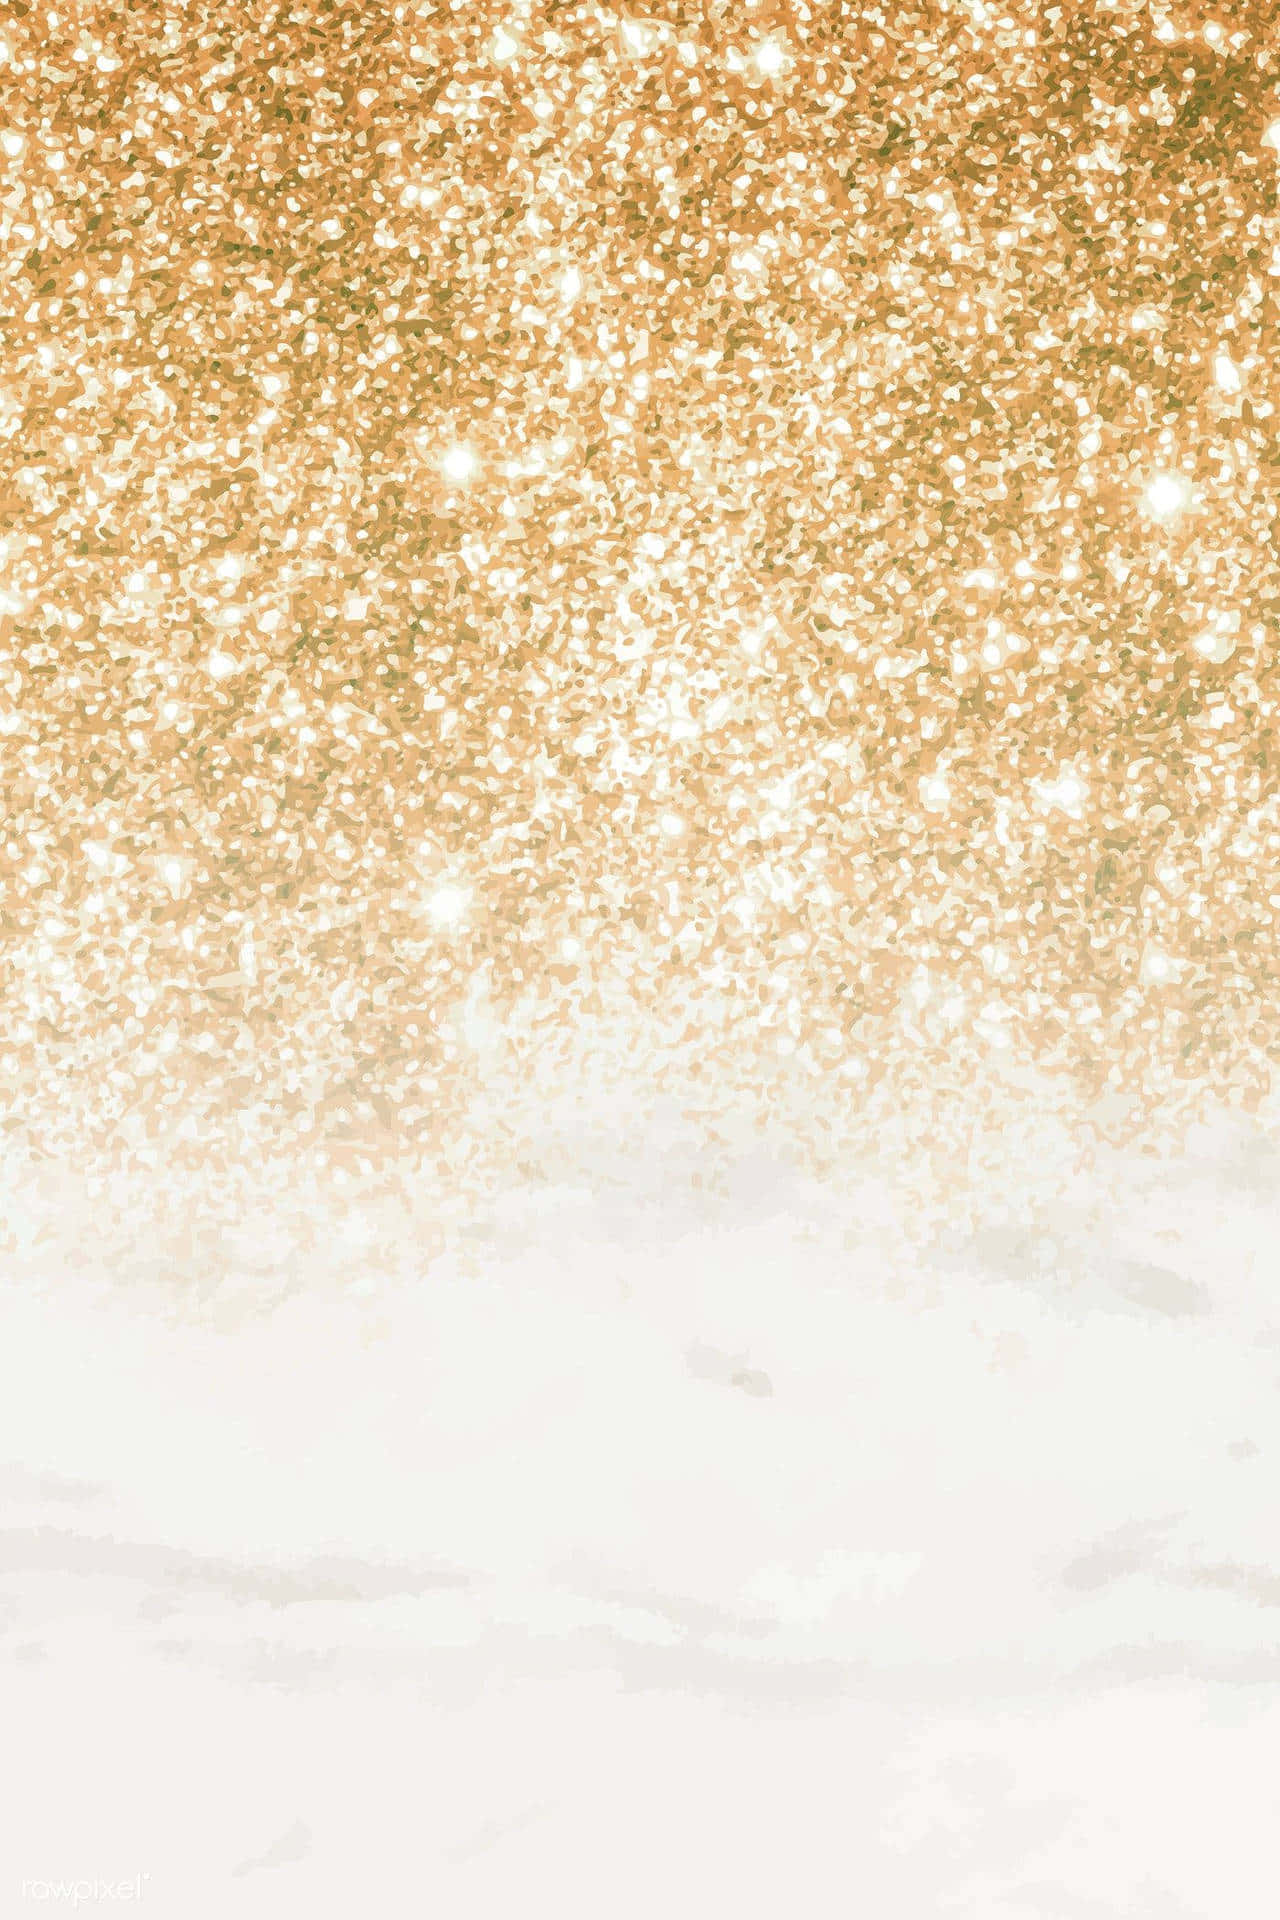 Luxurious White And Gold Pattern Background